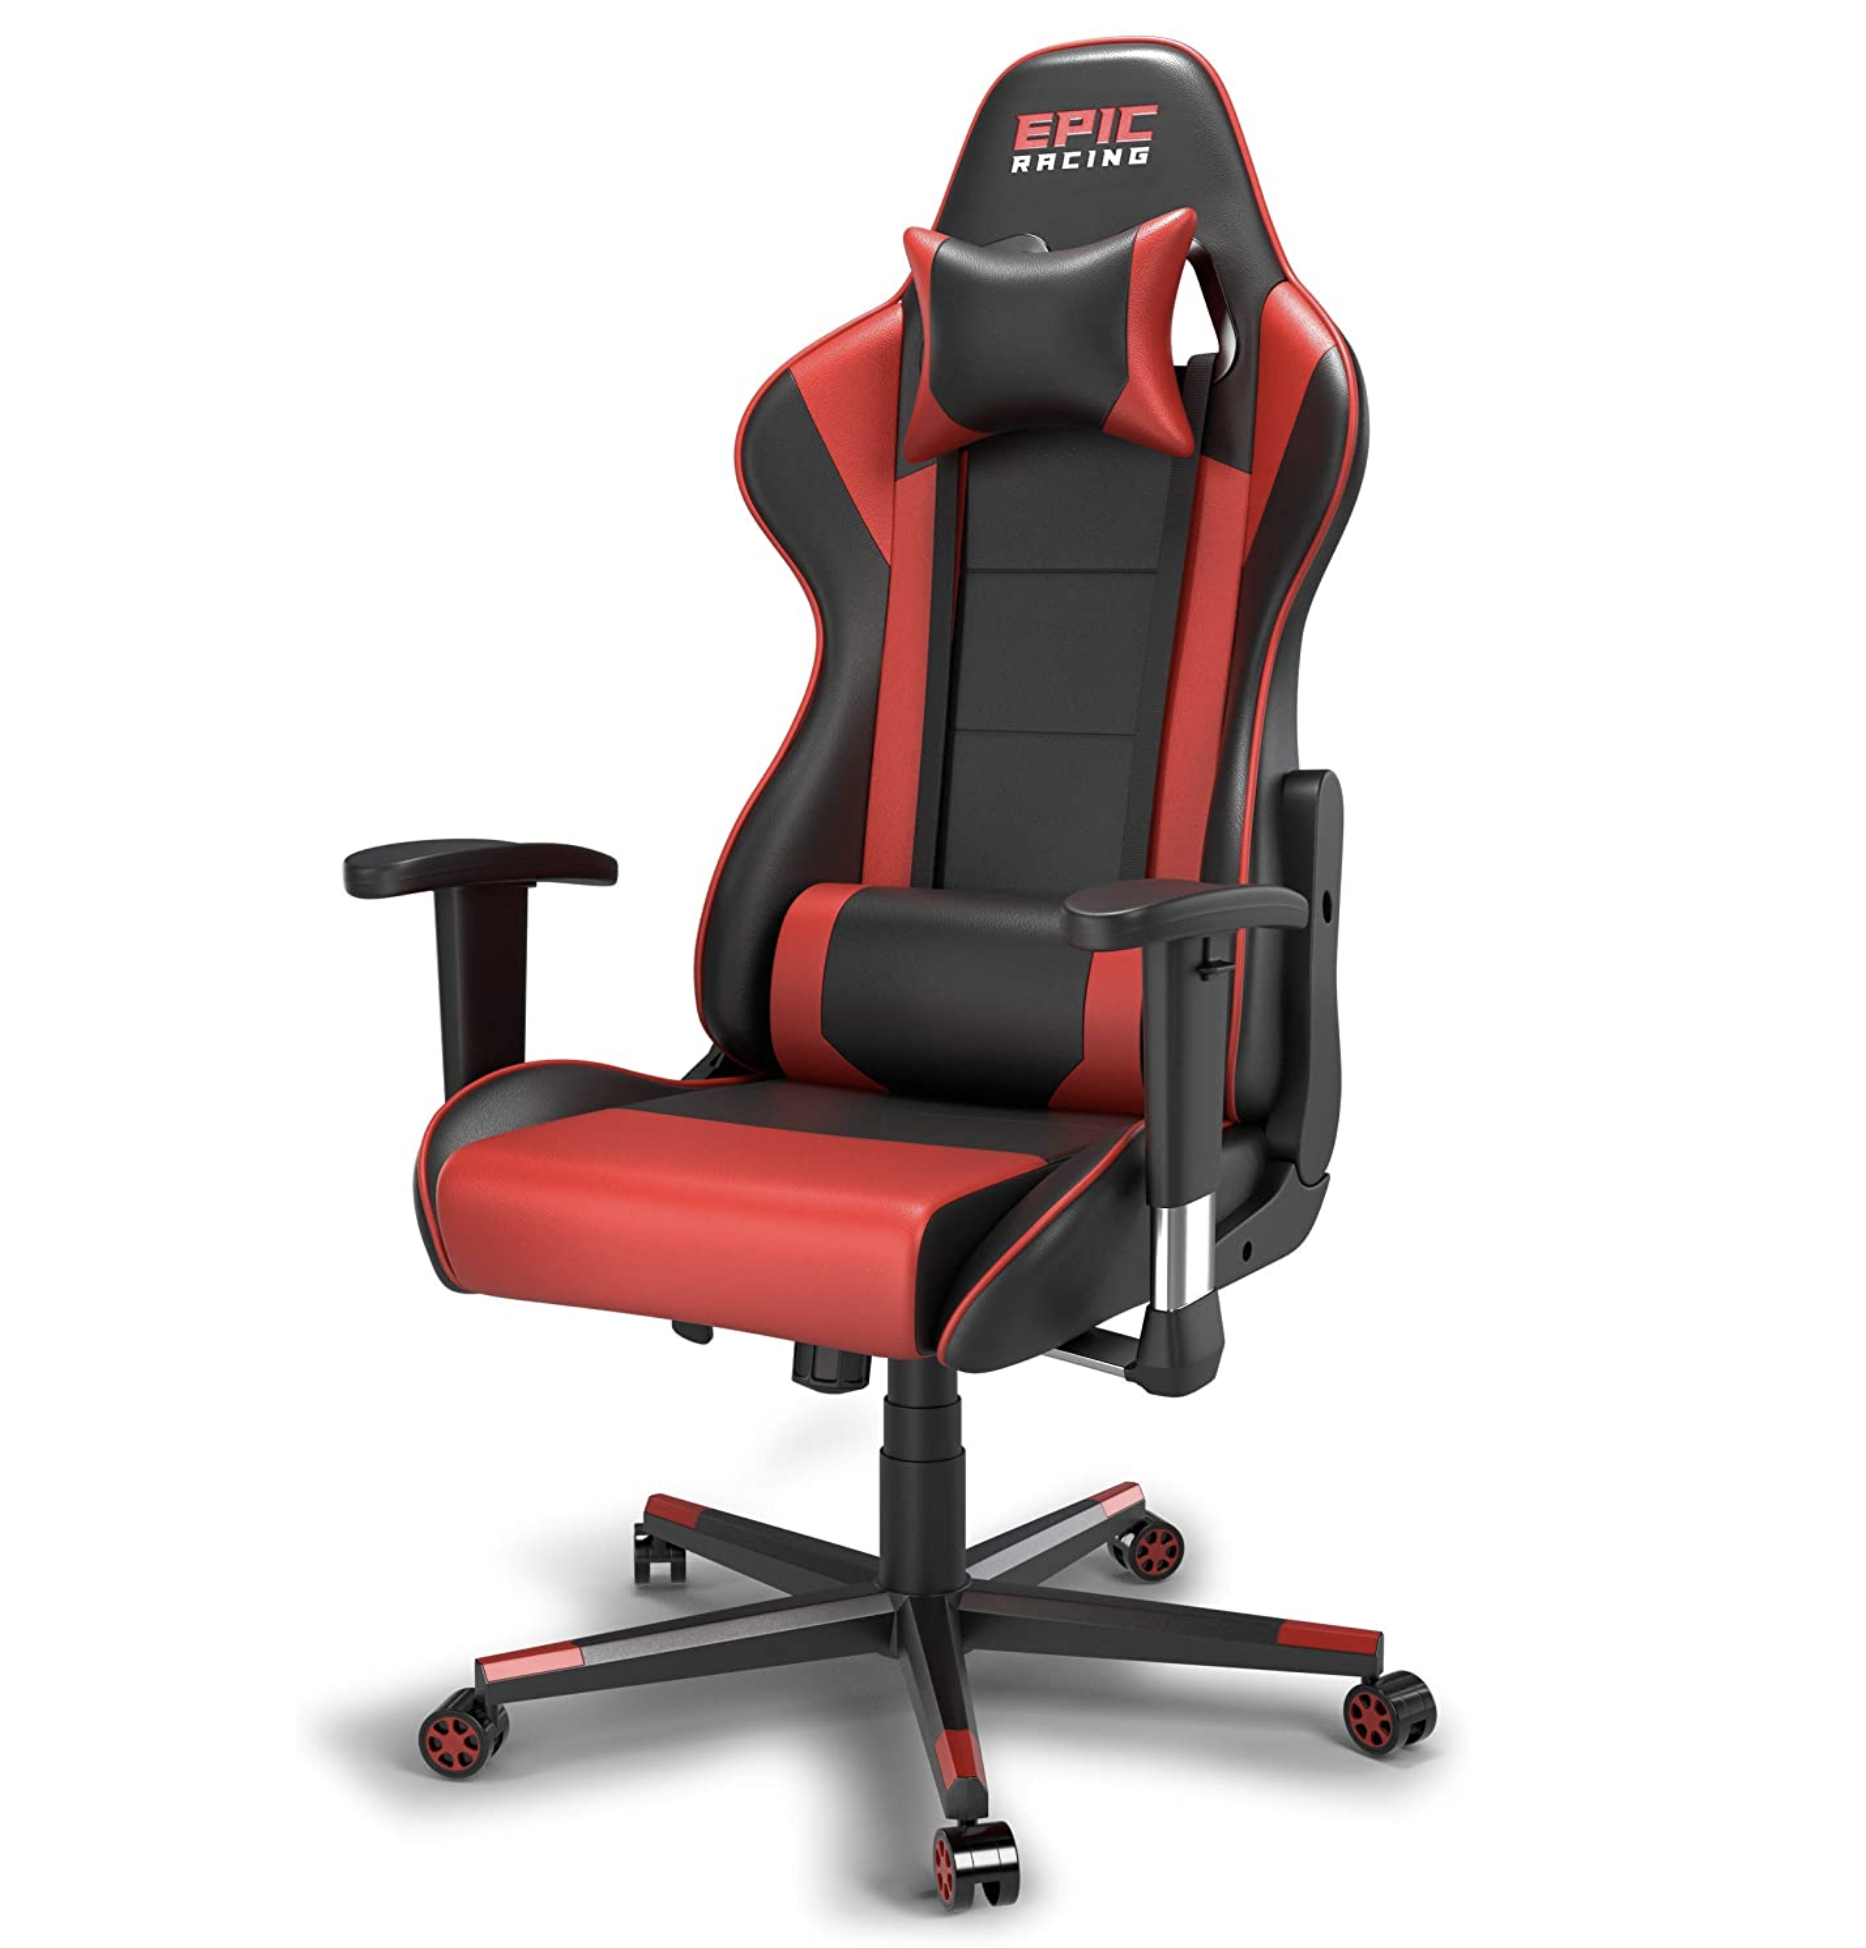 Epic Racing Professional Gaming Chair with Adjustable Height (Zehui)